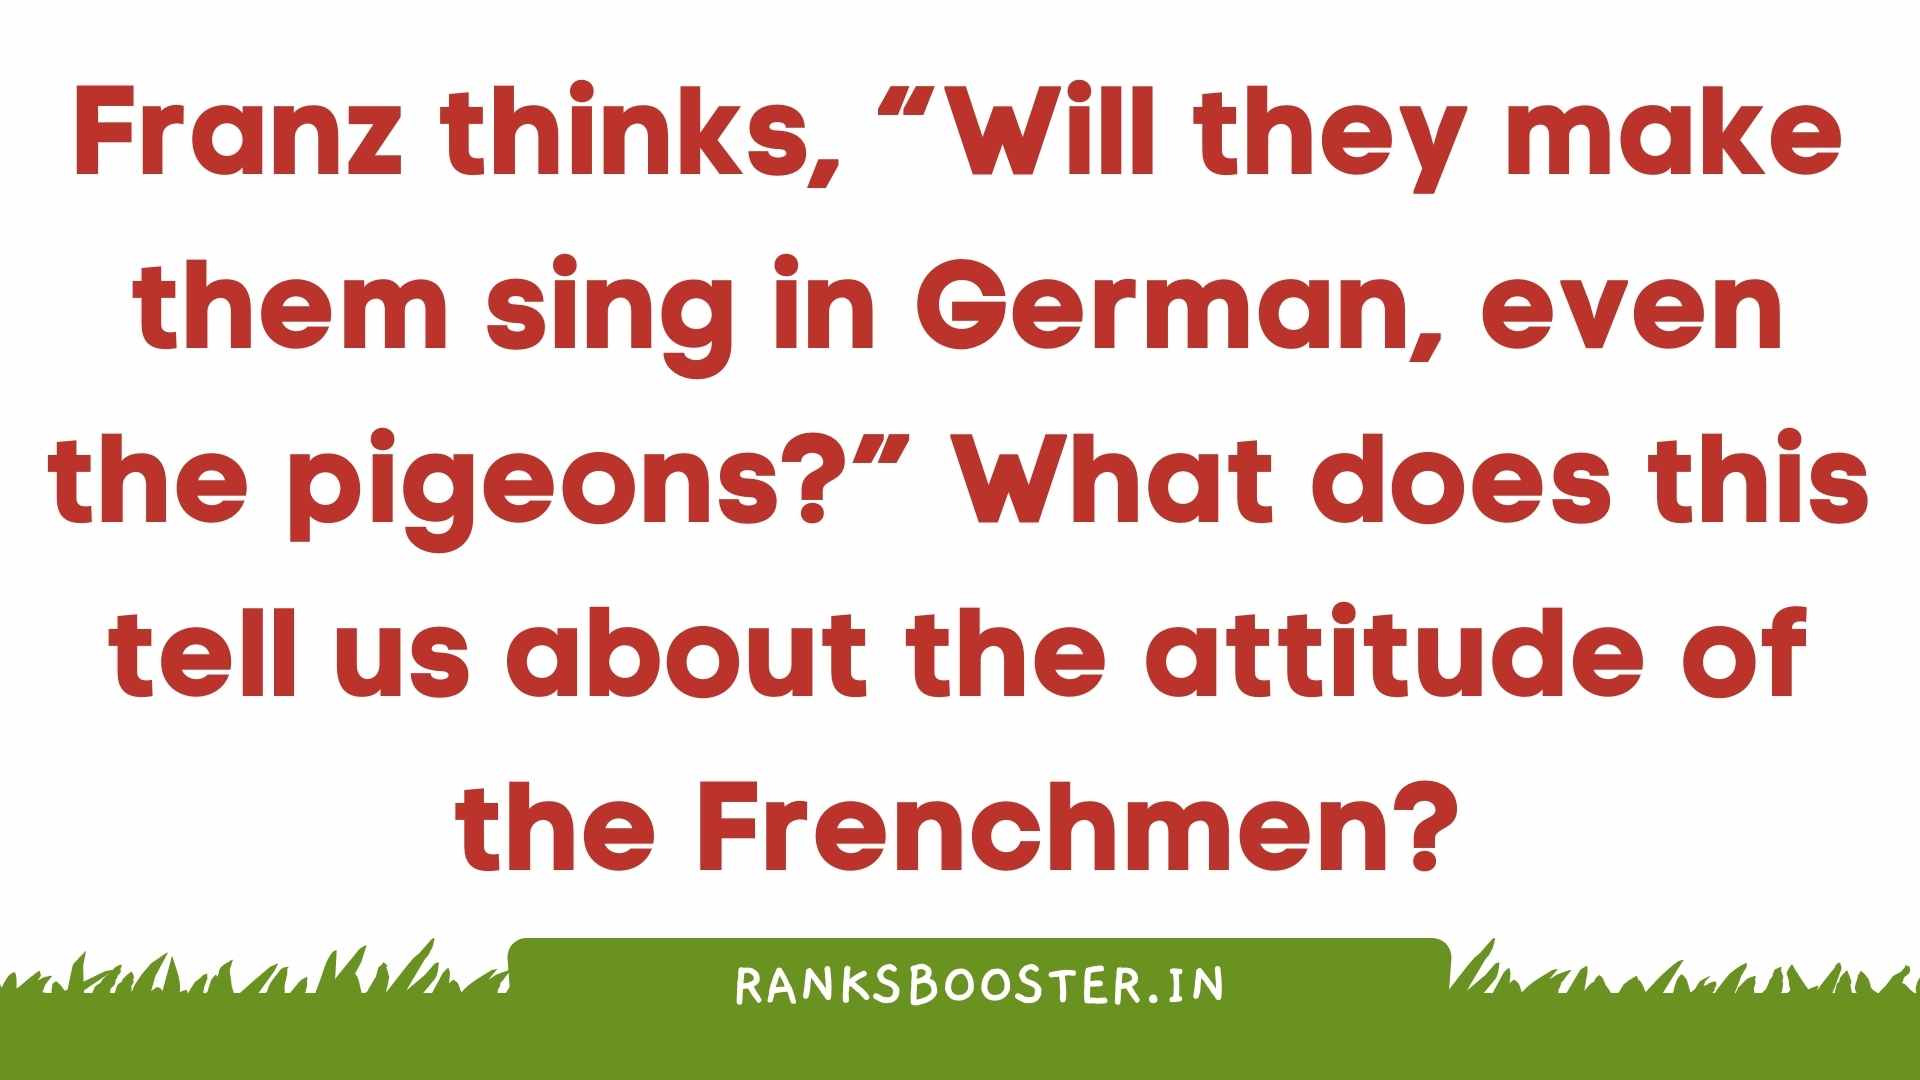 Franz thinks, “Will they make them sing in German, even the pigeons?” What does this tell us about the attitude of the Frenchmen?